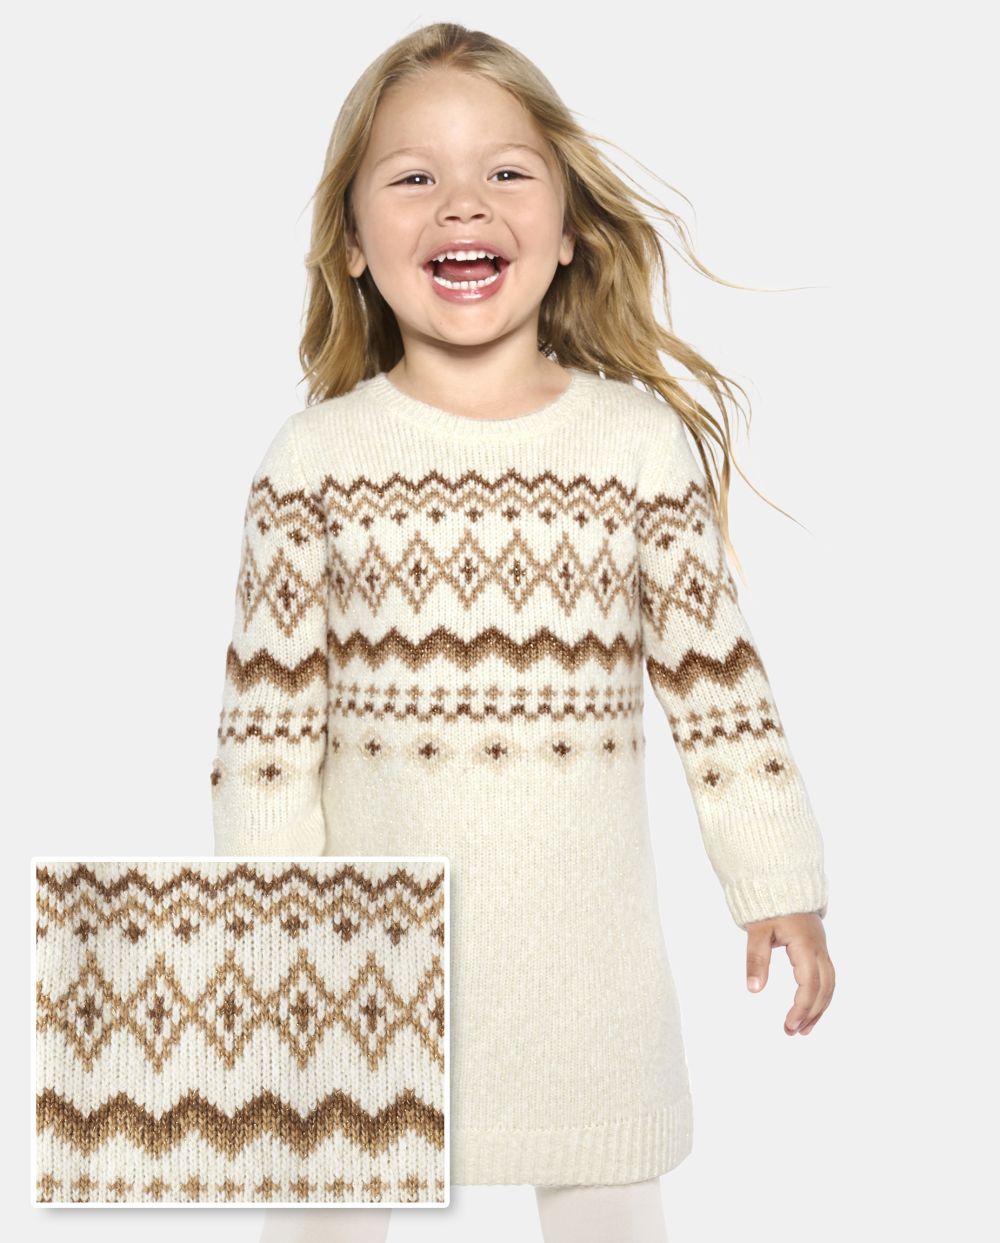 Tall Toddler Baby Sweater Long Sleeves Crew Neck Above the Knee Dress